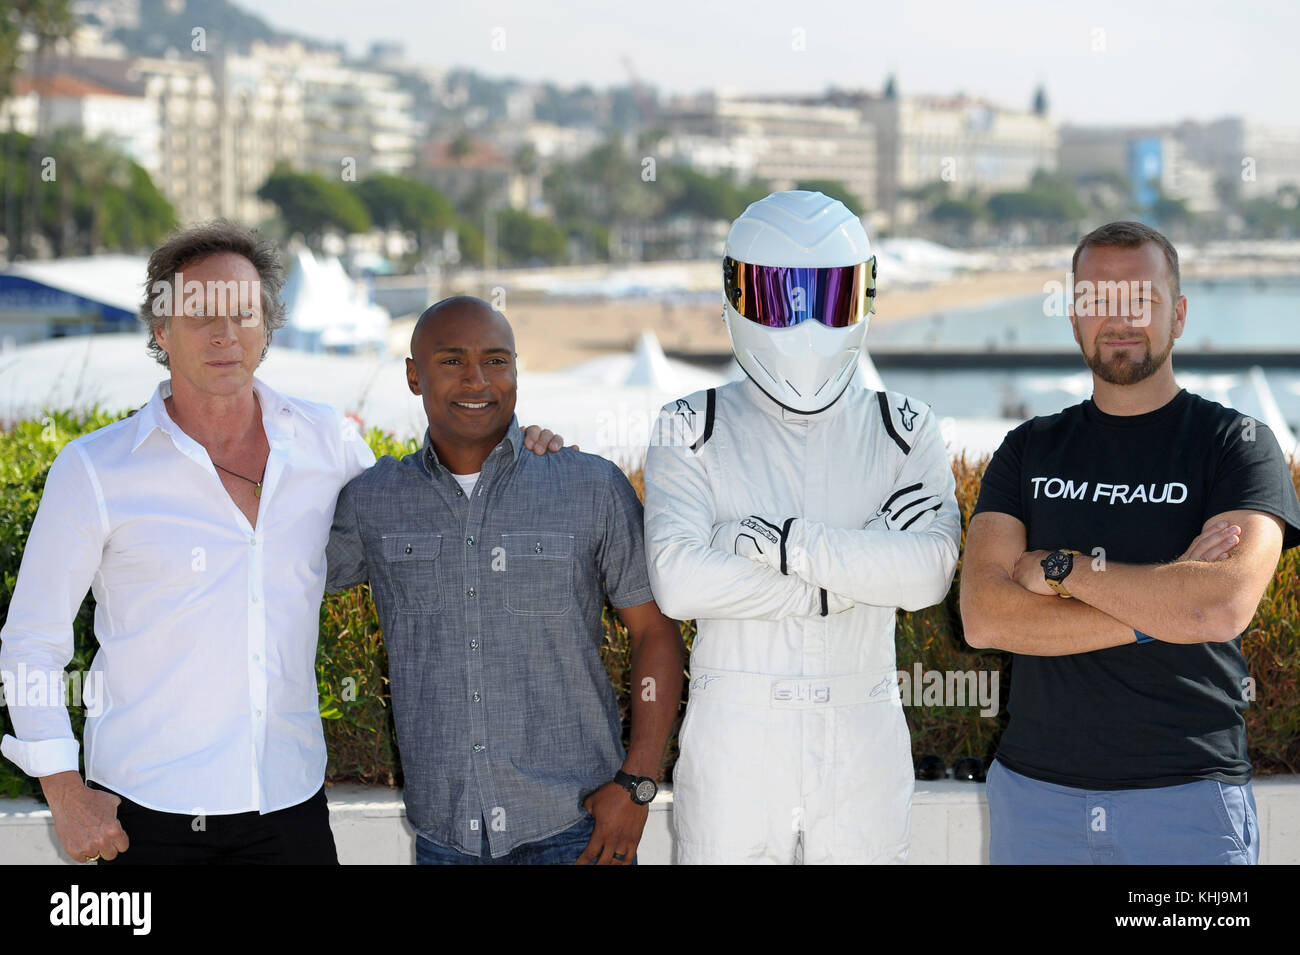 MIPCOM 2017 - Top Gear America - Photocall Featuring: The Stig, Antron Brown,  William Fichtner, Tom Ford Where: Cannes, Provence-Alpes-Côte d'Azur,  France When: 17 Oct 2017 Credit: IPA/WENN.com **Only available for  publication